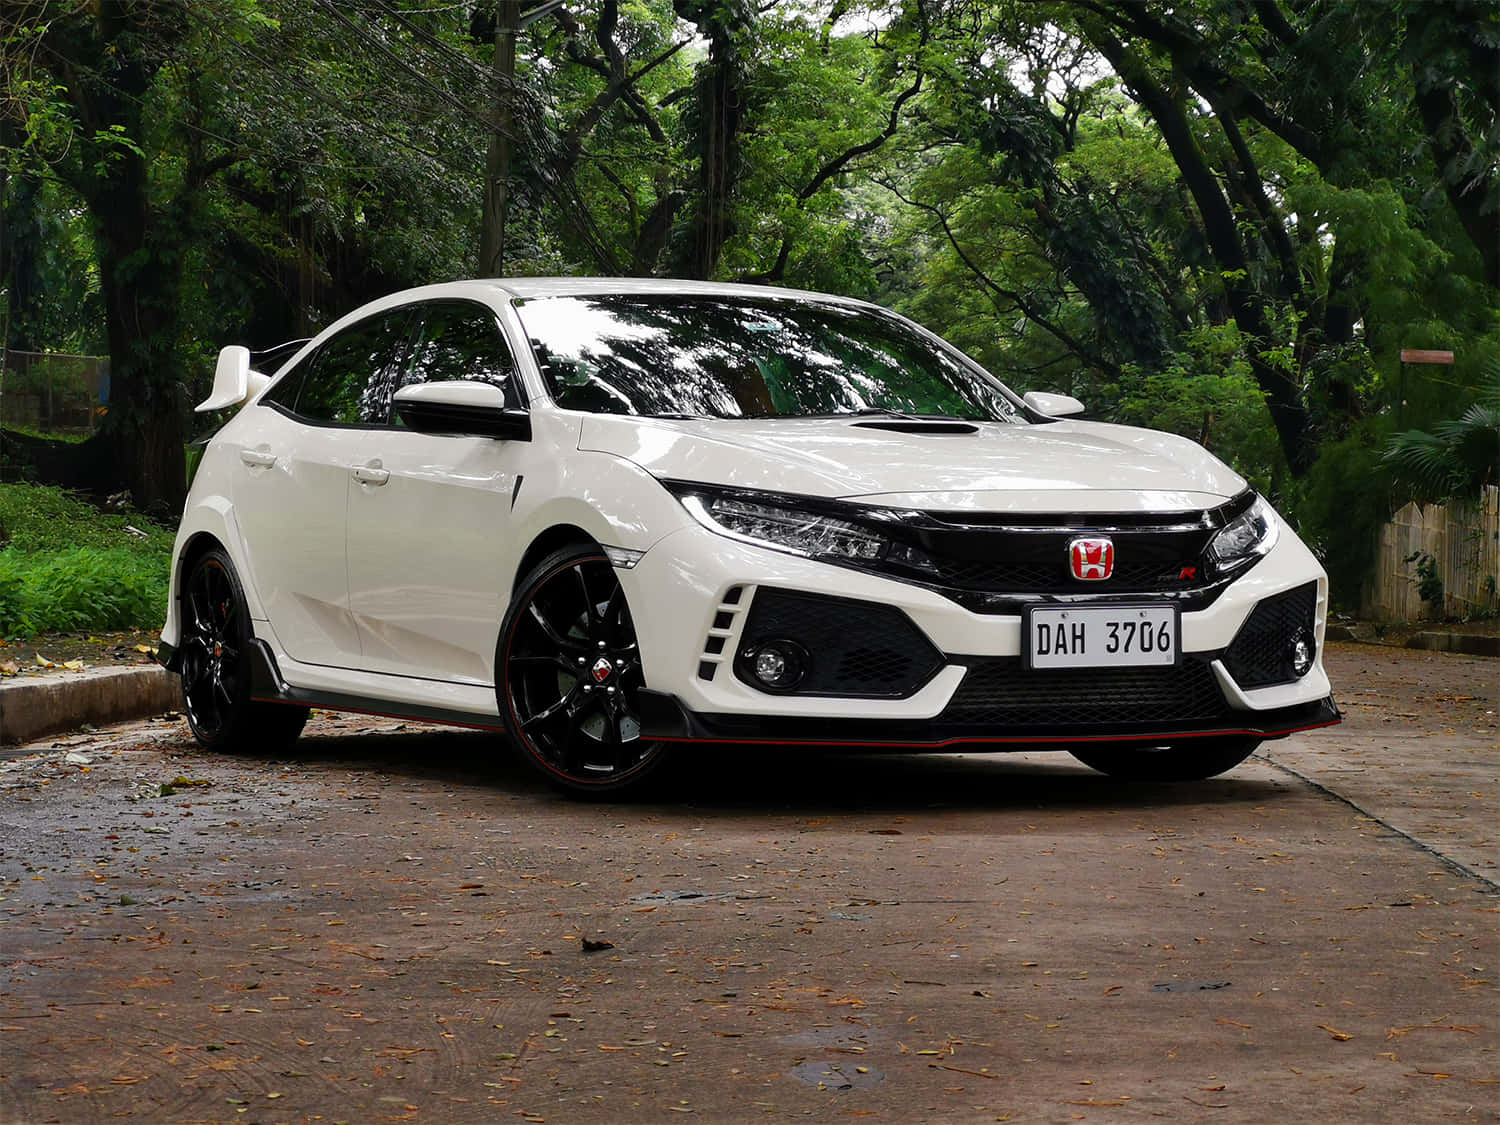 The Honda Civic Type R is Ready To Take On Any Track Wallpaper